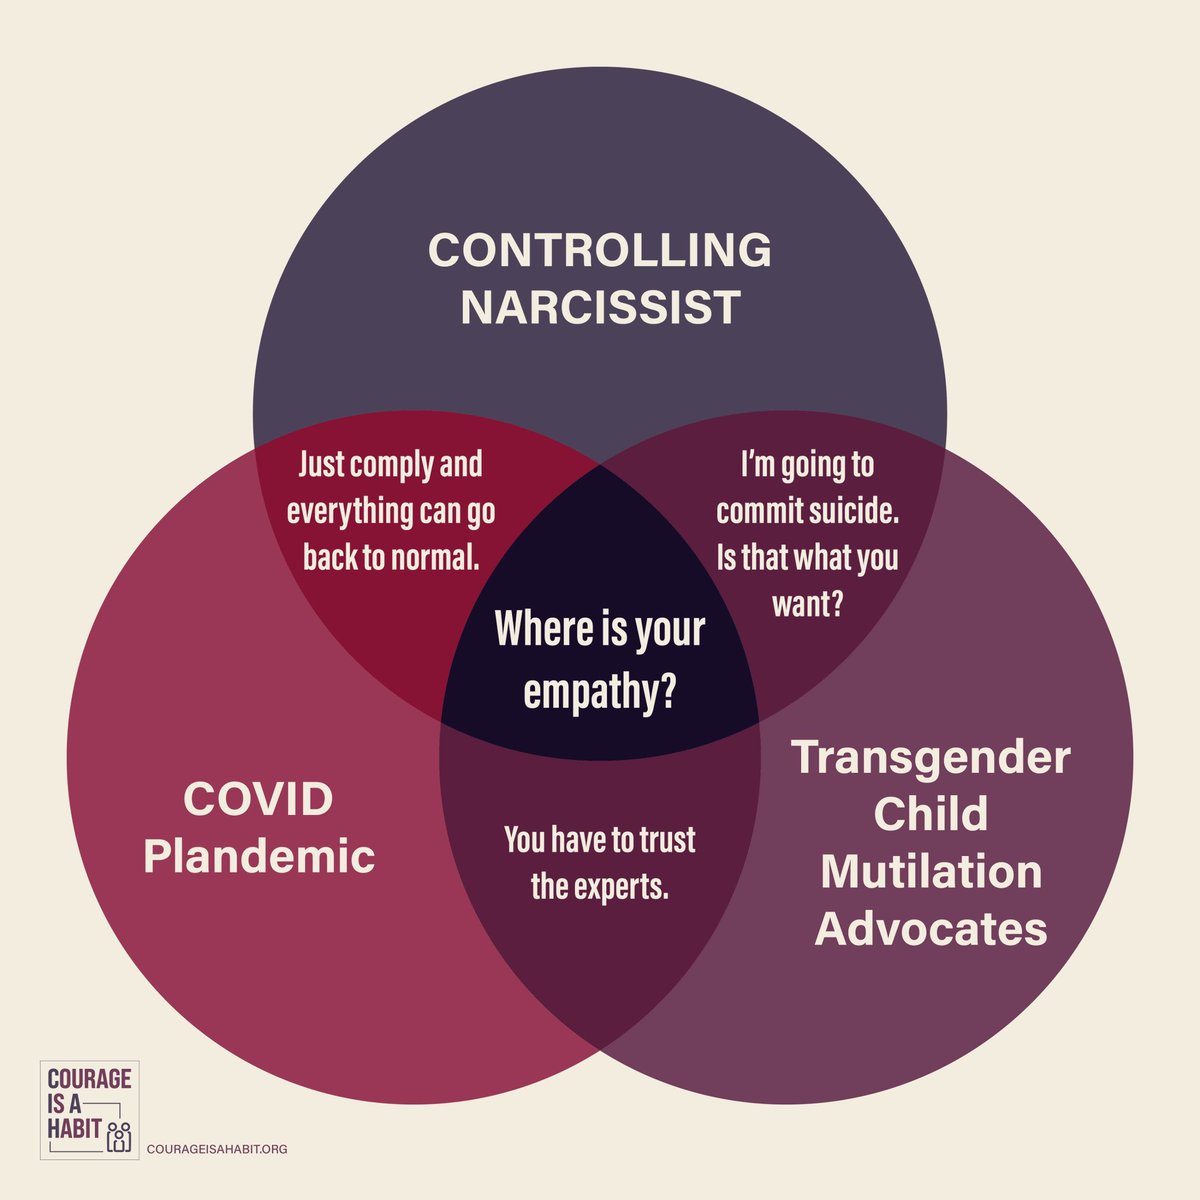 If you are a #VennDiagram fan, this is a good one.